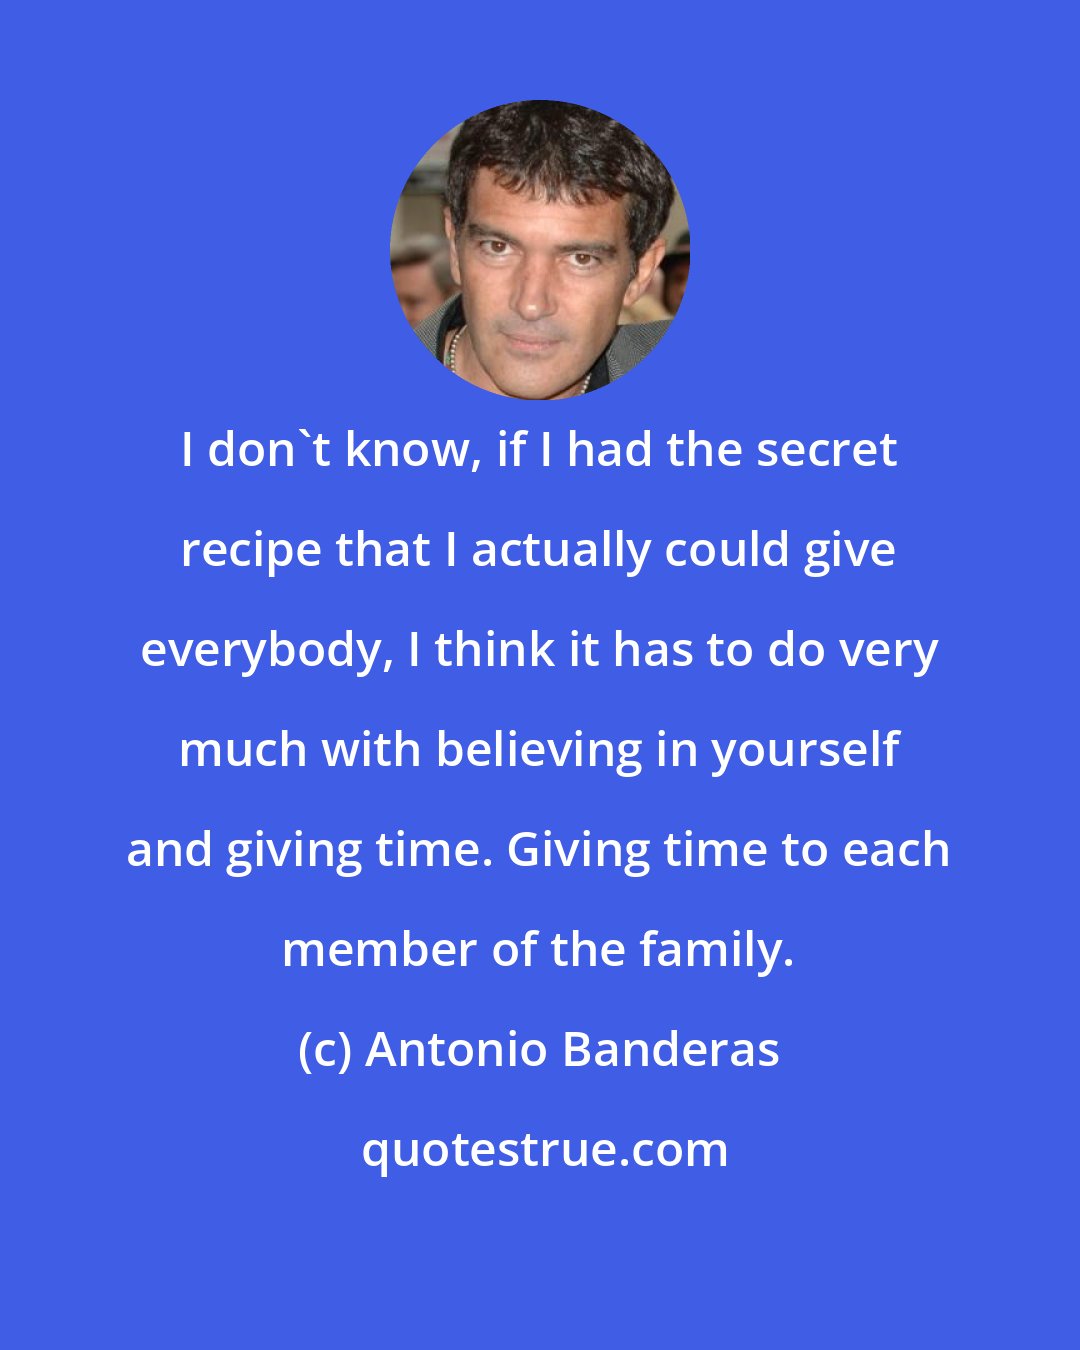 Antonio Banderas: I don't know, if I had the secret recipe that I actually could give everybody, I think it has to do very much with believing in yourself and giving time. Giving time to each member of the family.